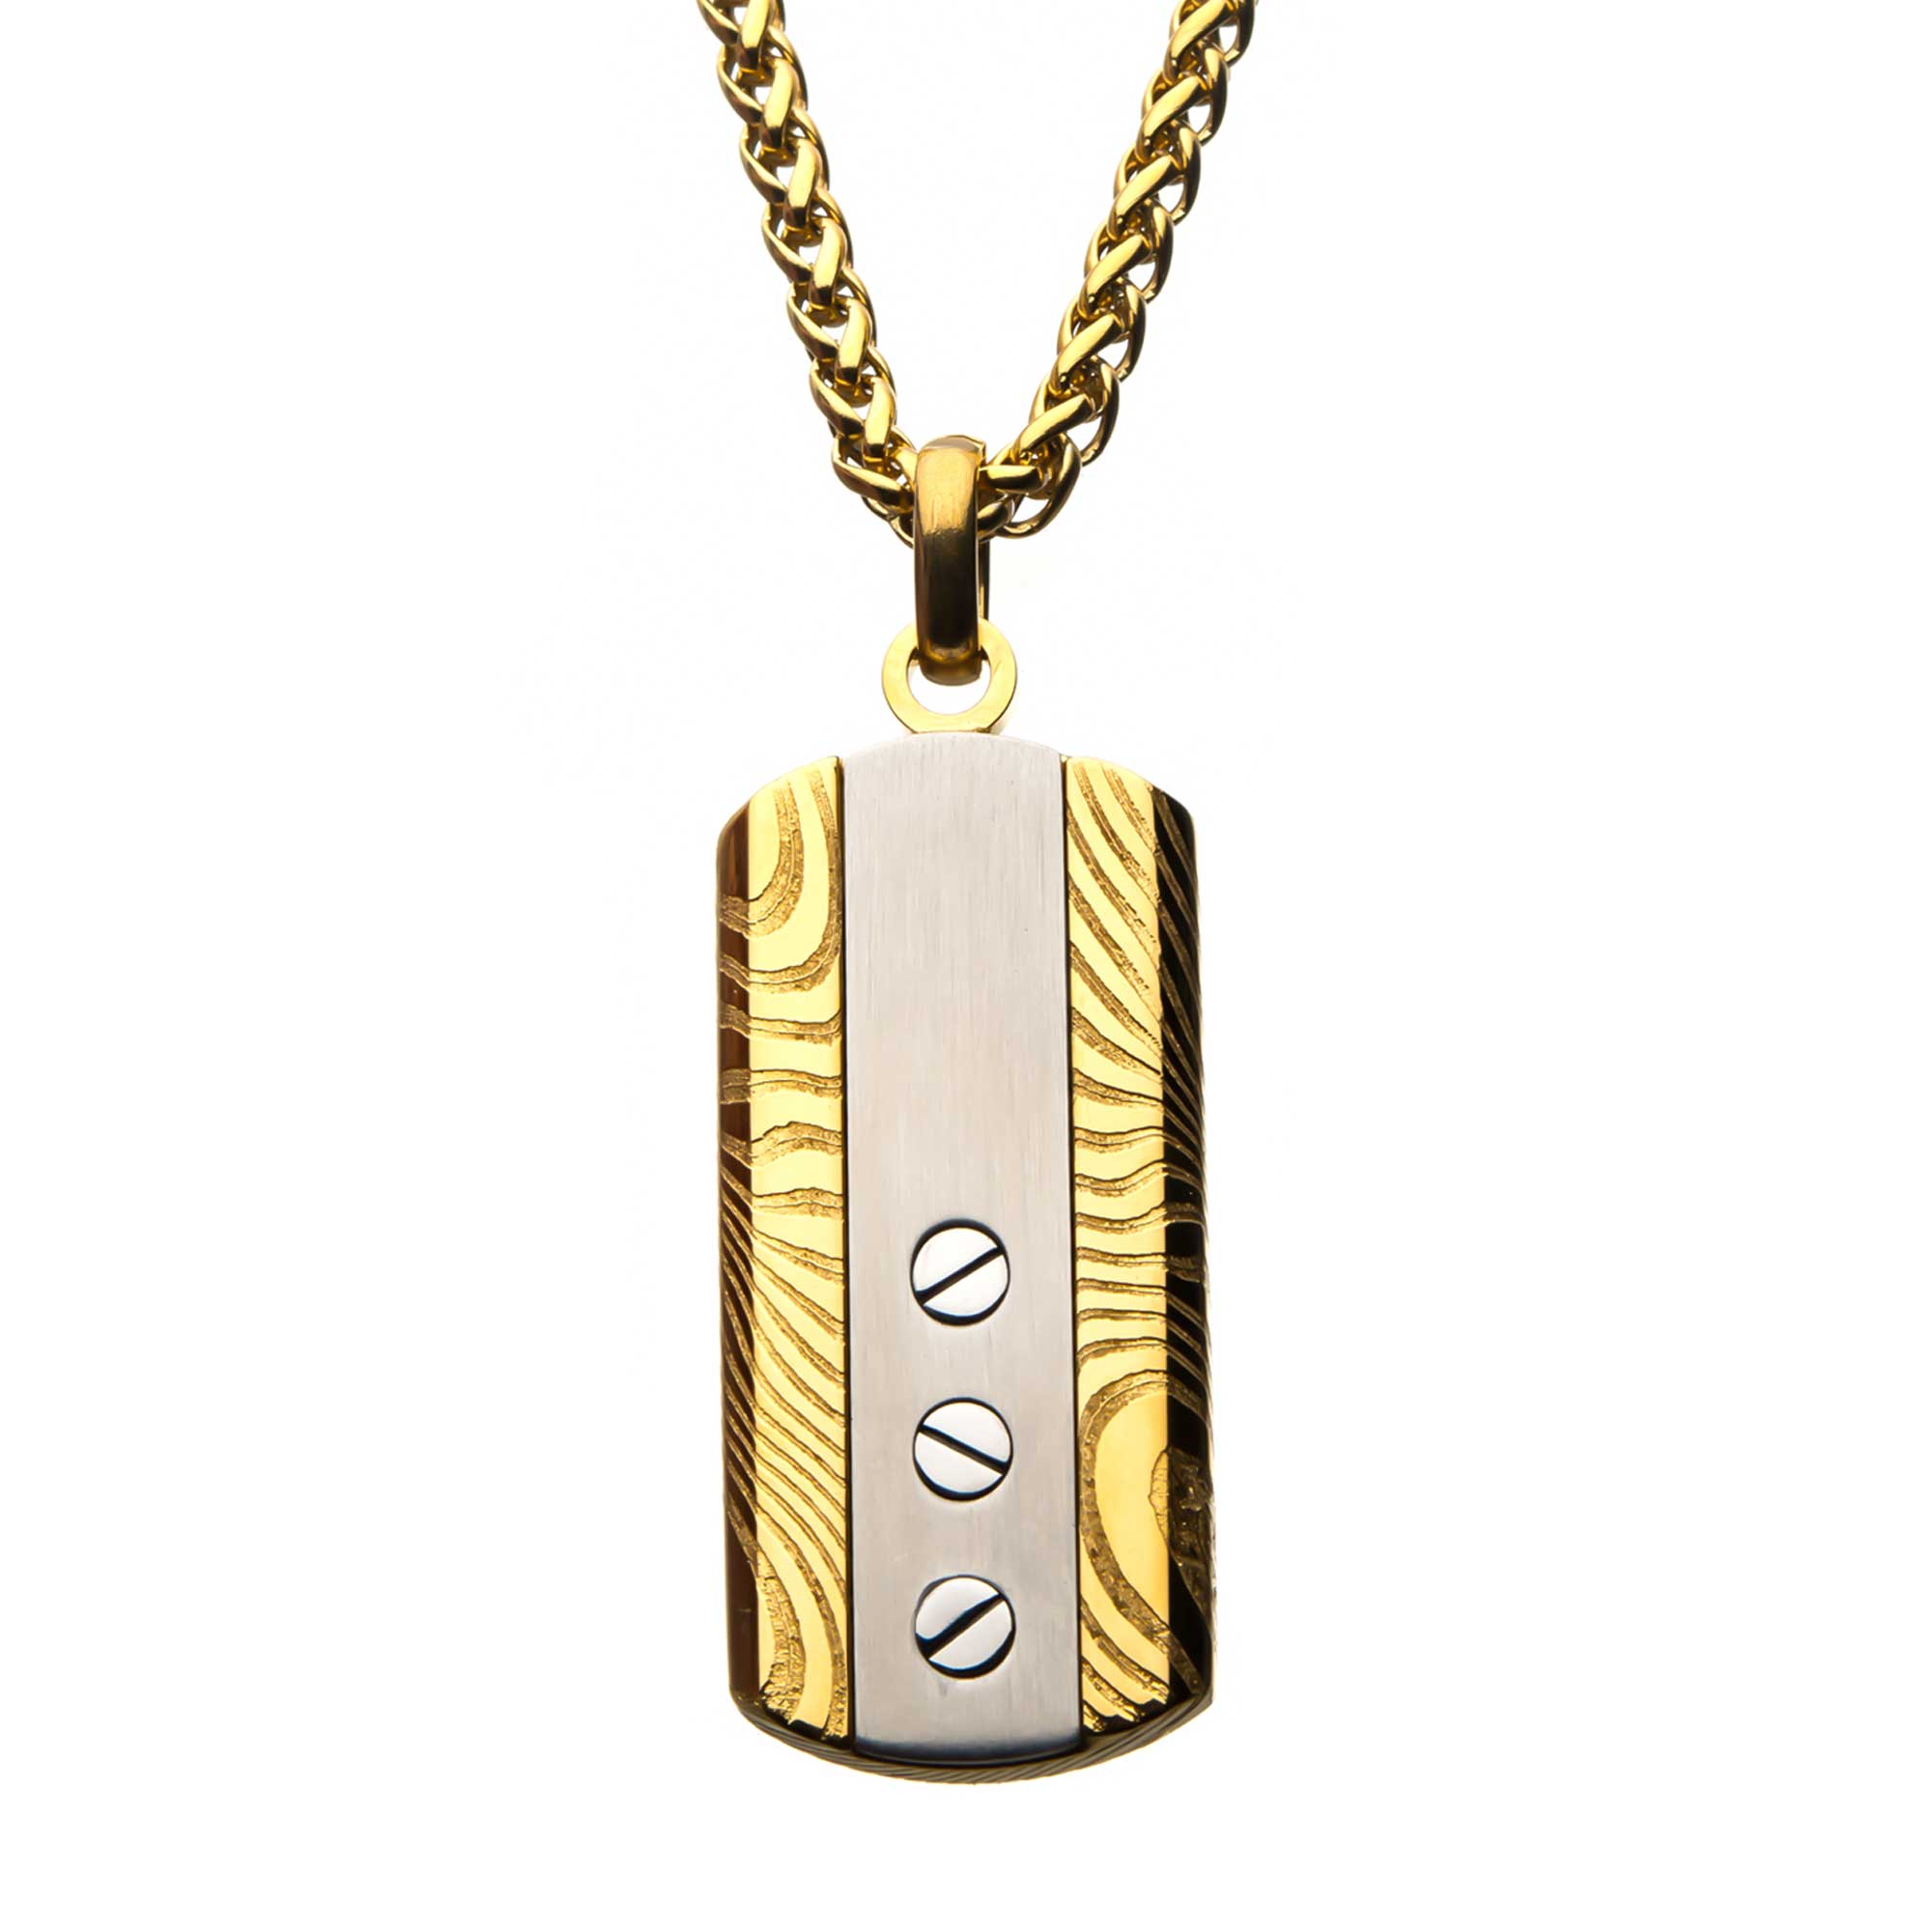 Stainless Steel & Gold Plated Screw Damascus Dog Tag Pendant with Chain